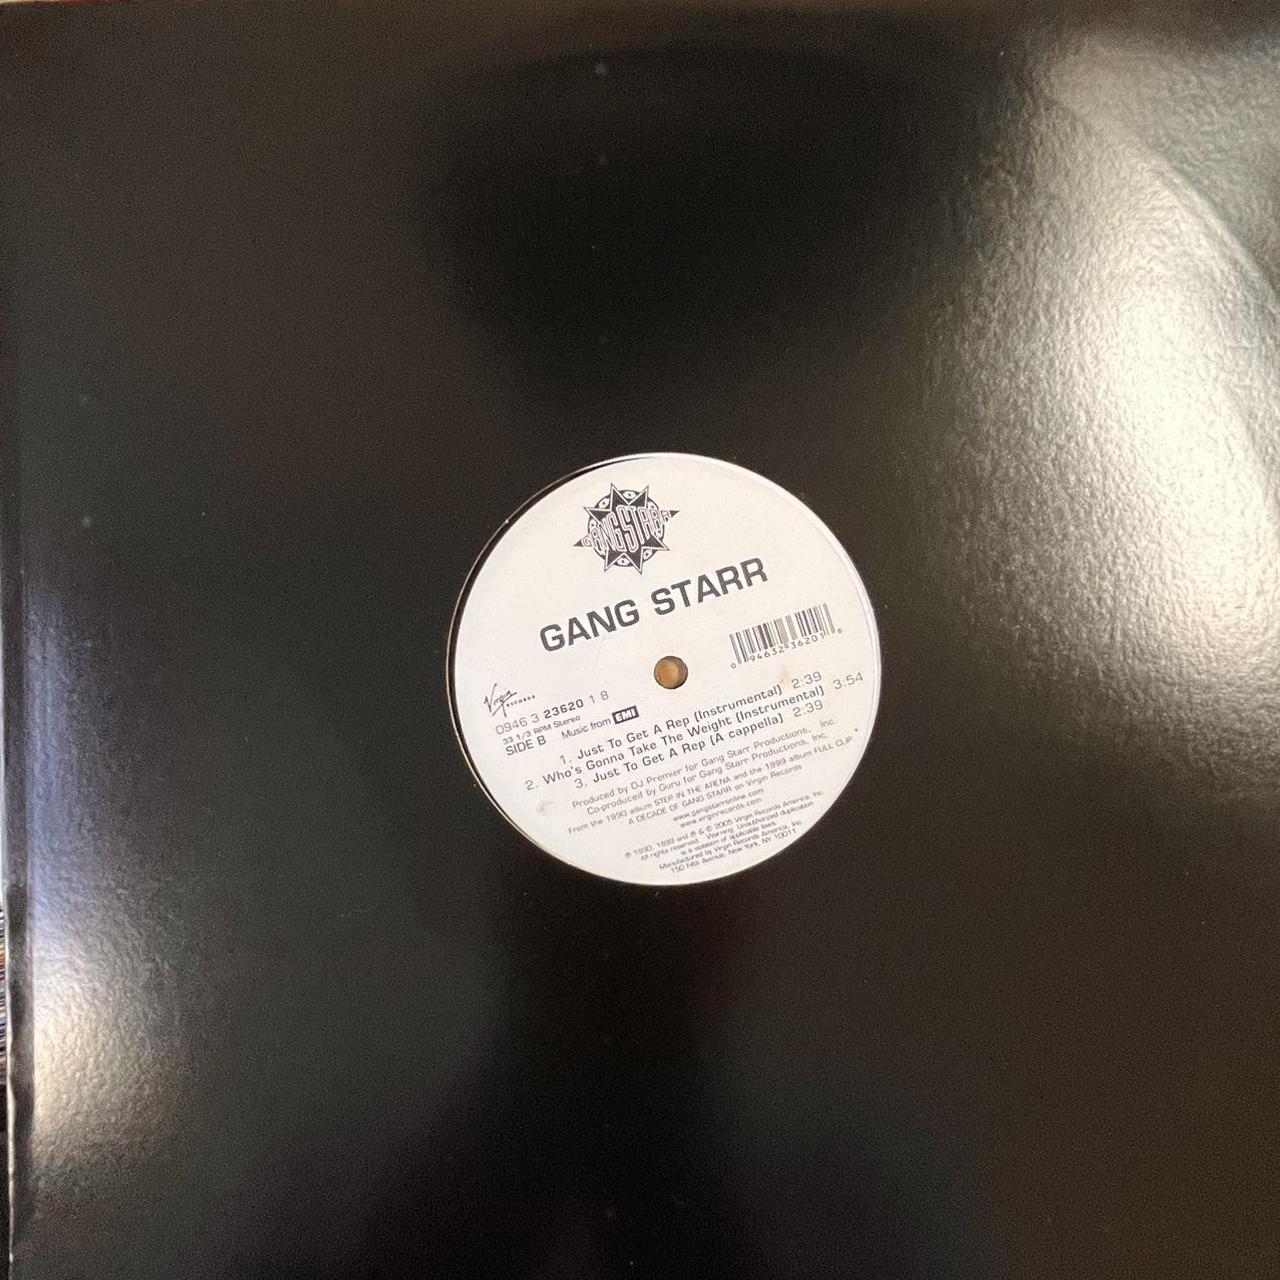 Gang Starr “Just To Get A Rep” 5 Track 12inch Vinyl